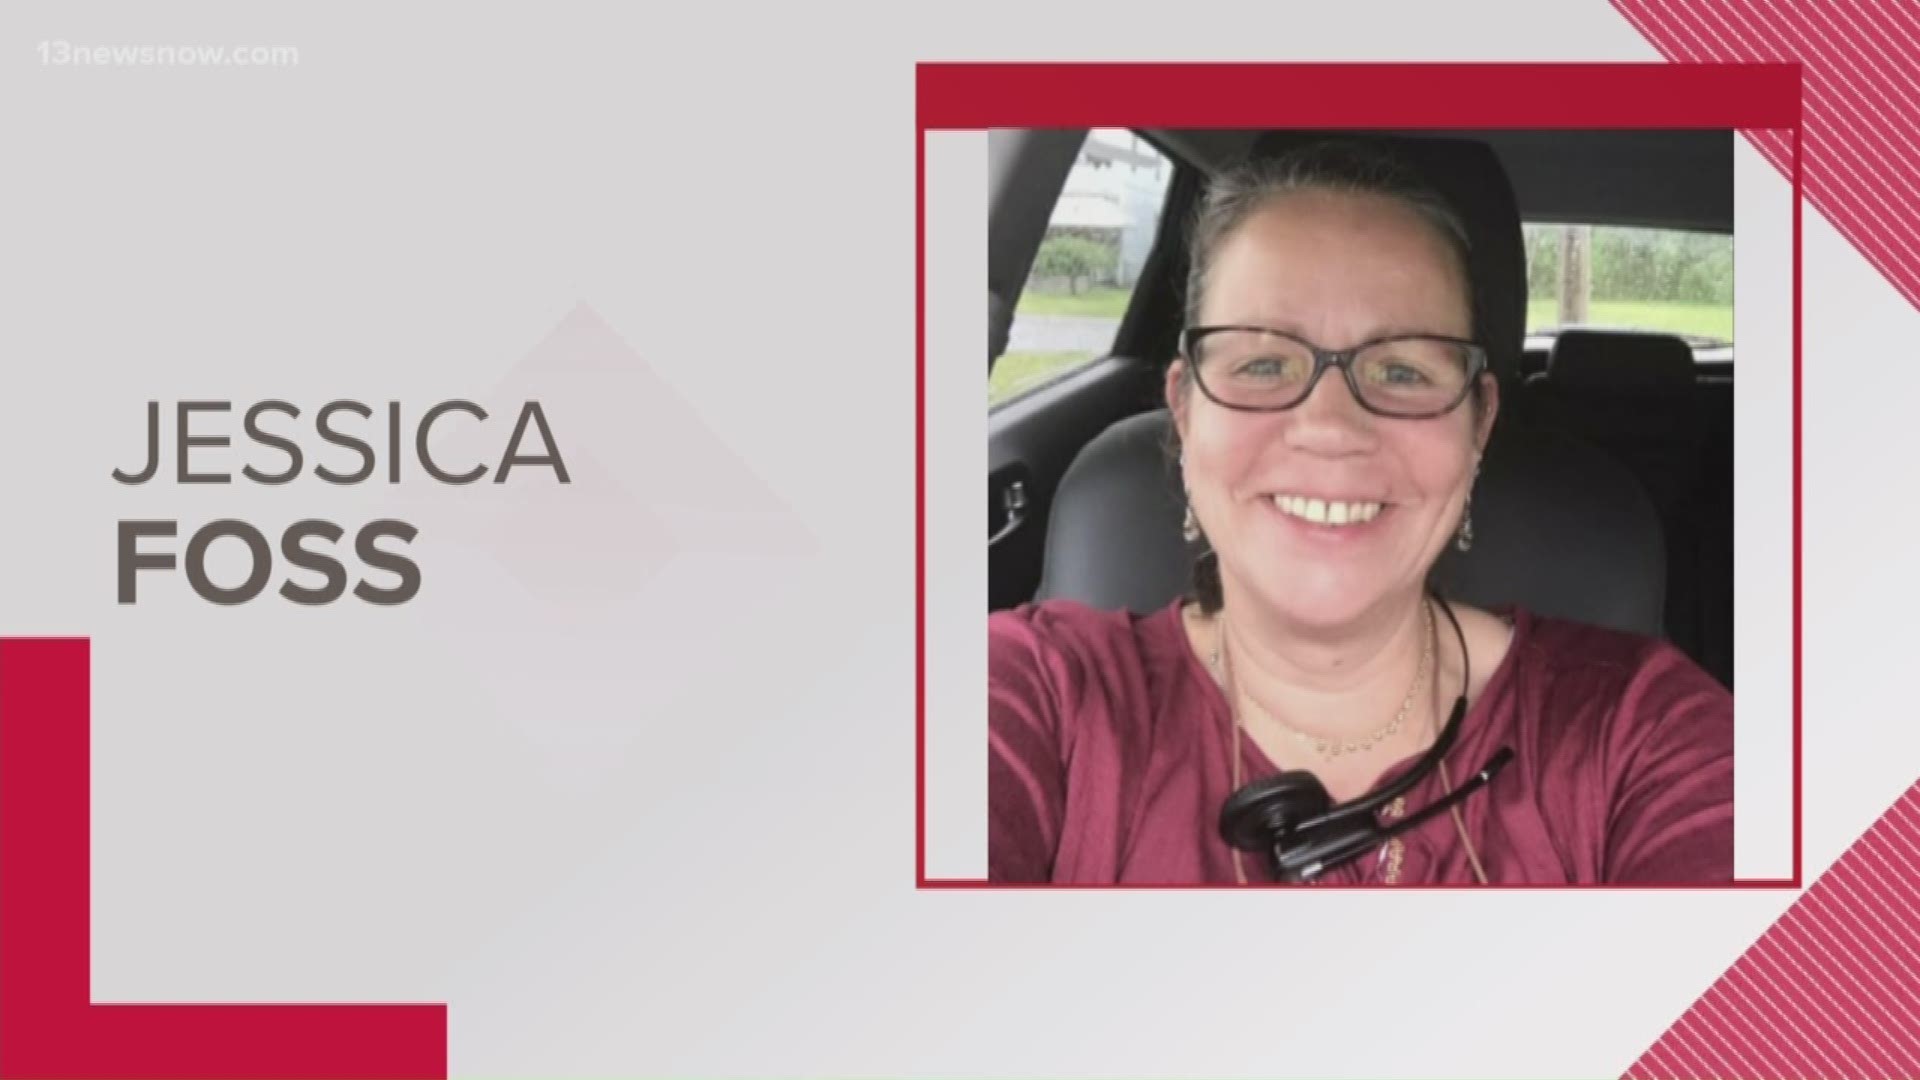 Police said 50-year-old Jessica Foss hasn't been seen since Wednesday evening. She called a family member Thursday morning, but she's been unreachable since.